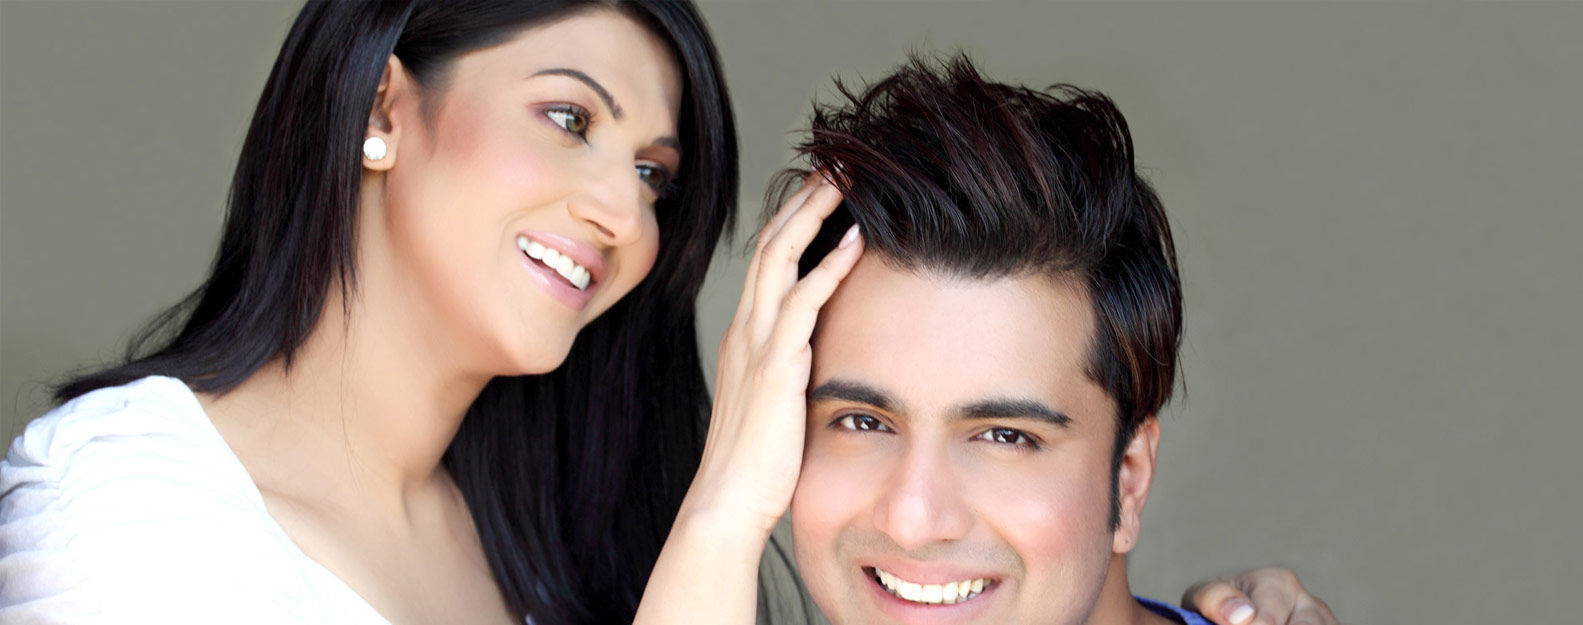 Best Hair Weaving as well as Non surgical hair replacement Services in Delhi / NCR - Looks Enhance.